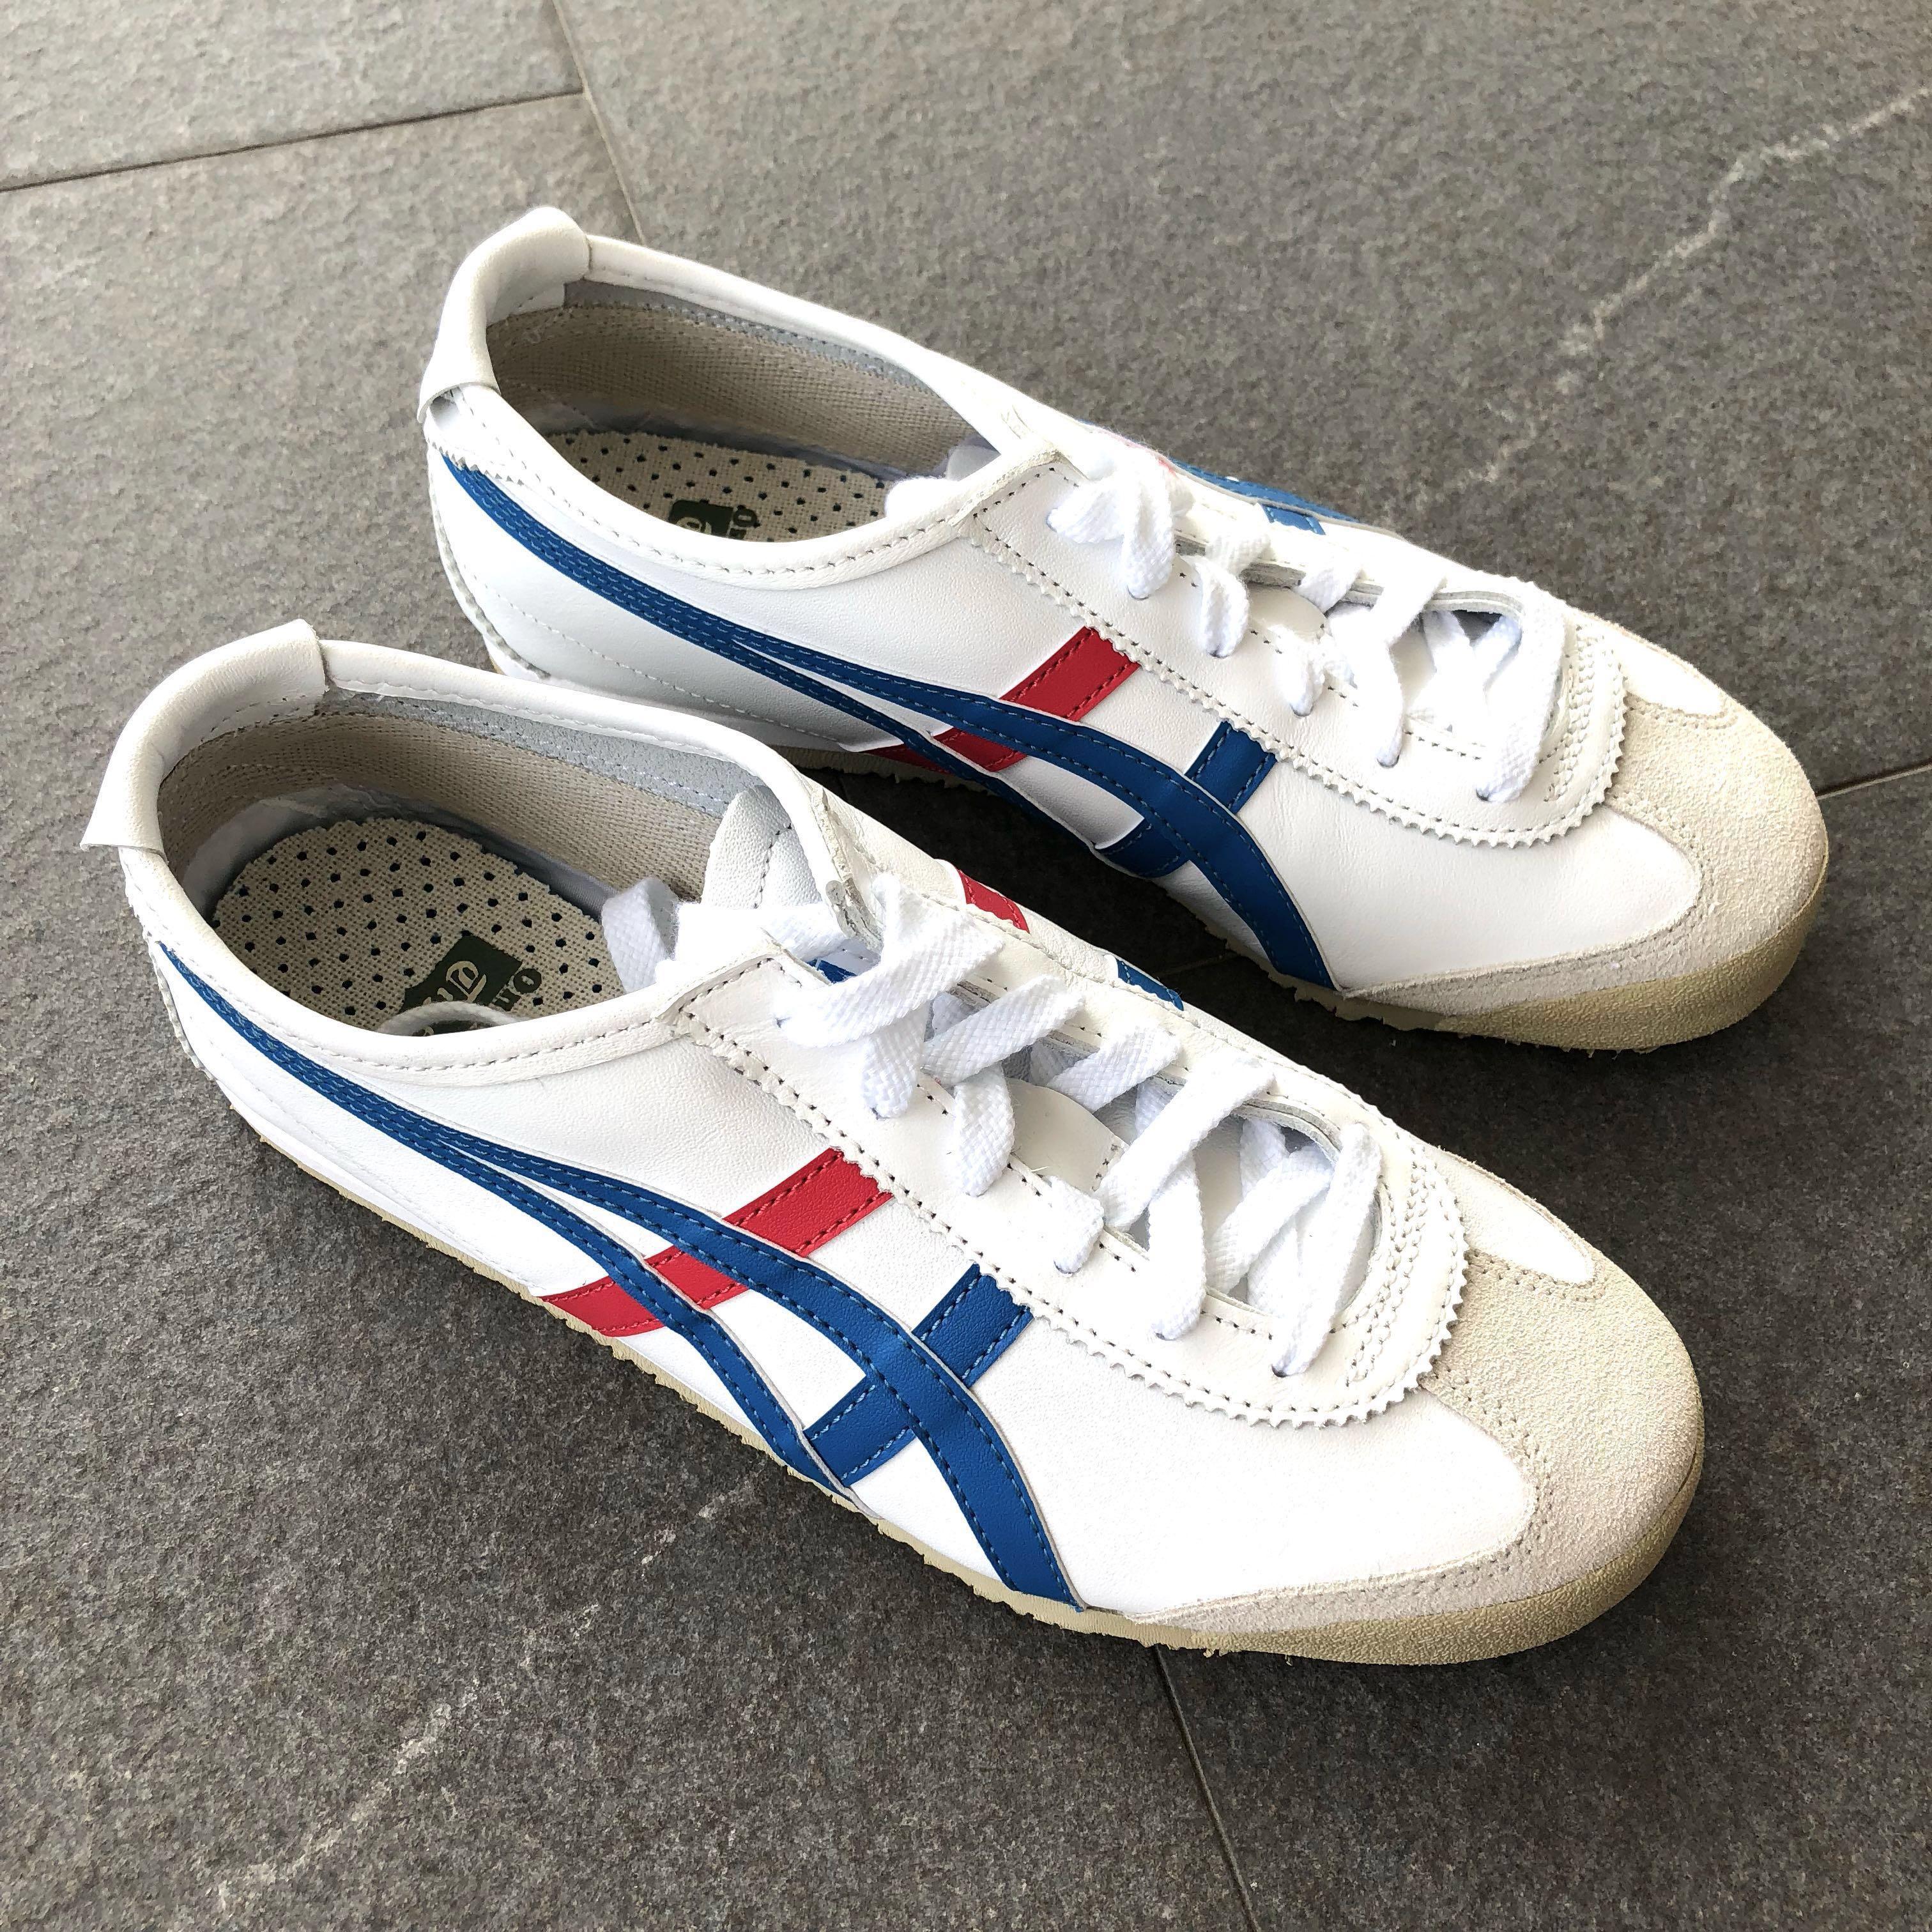 onitsuka tiger shoes without laces 